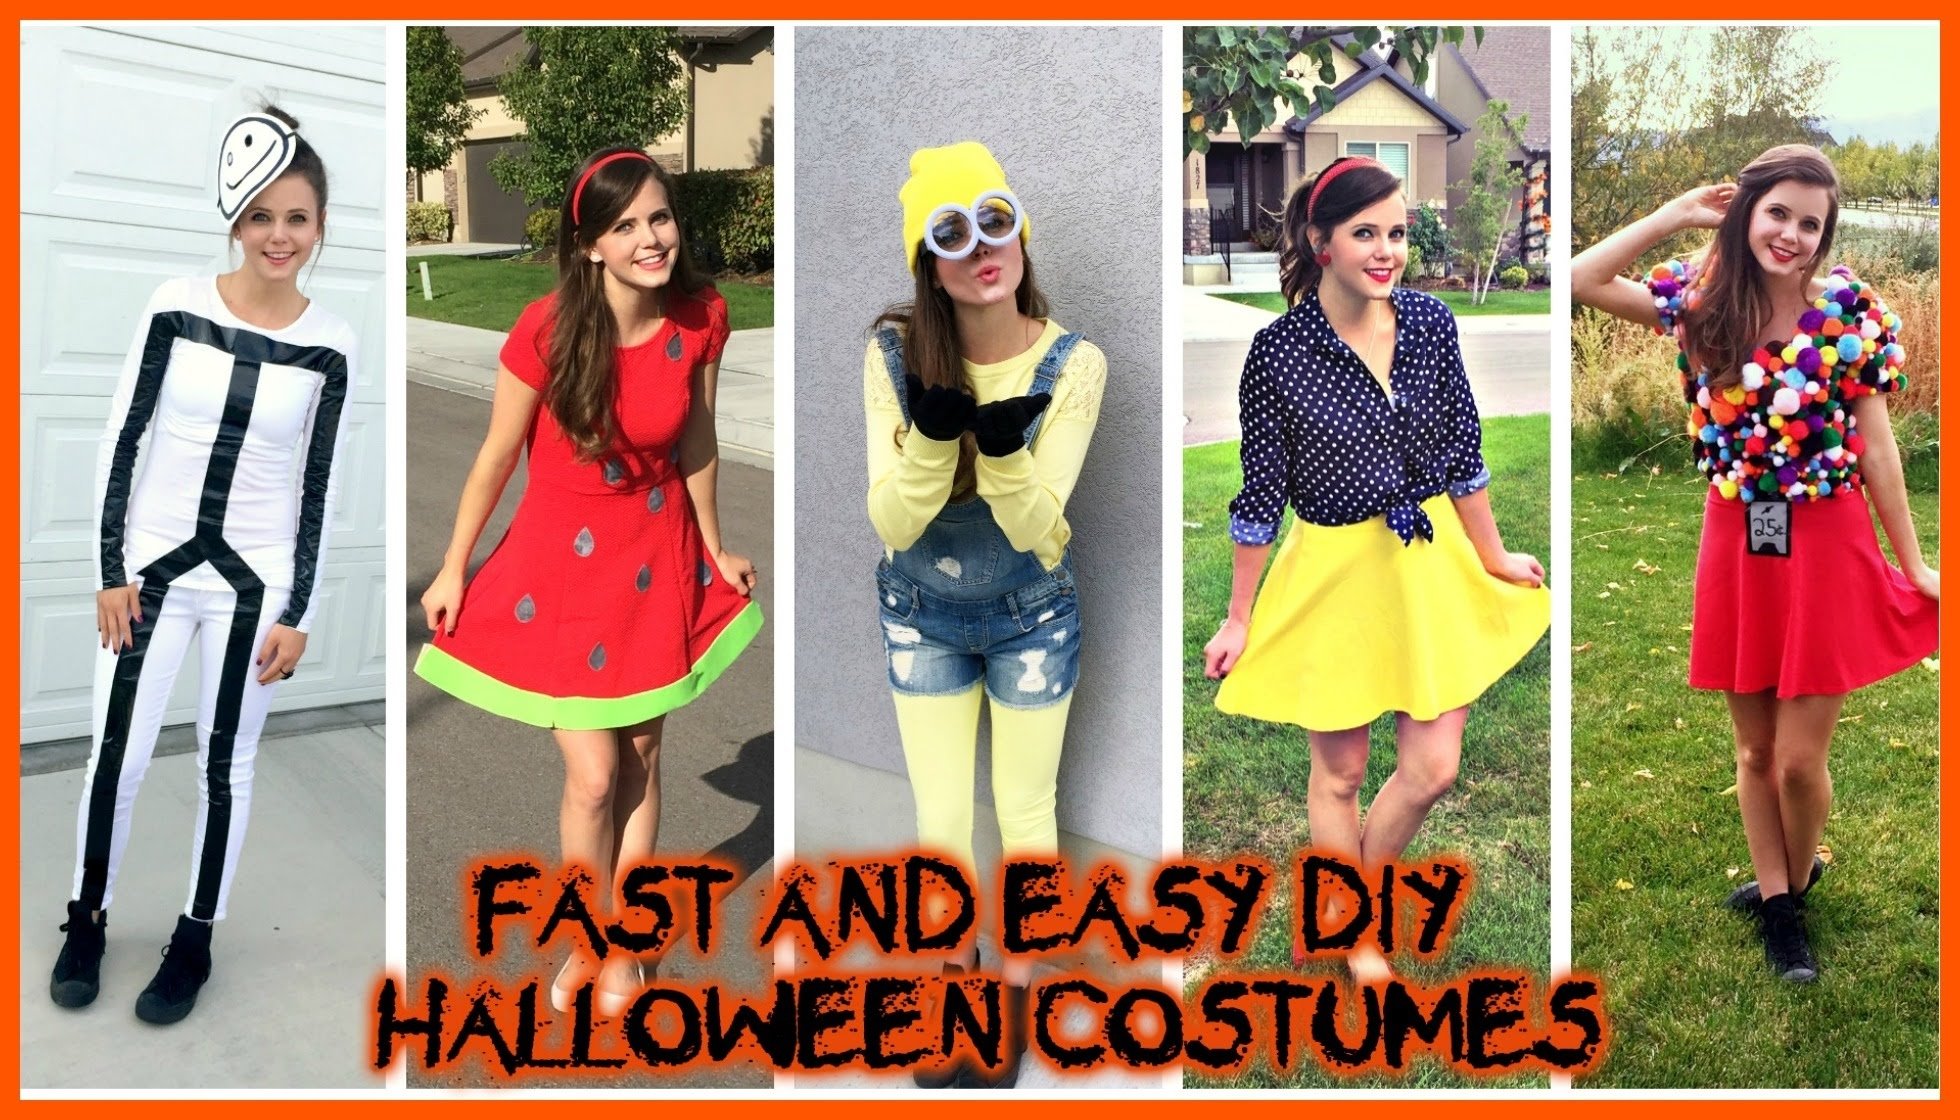 10 Attractive Homemade Costume Ideas For Adults diy halloween costumes super easy cheap last minute ideas tiffany 15 2022